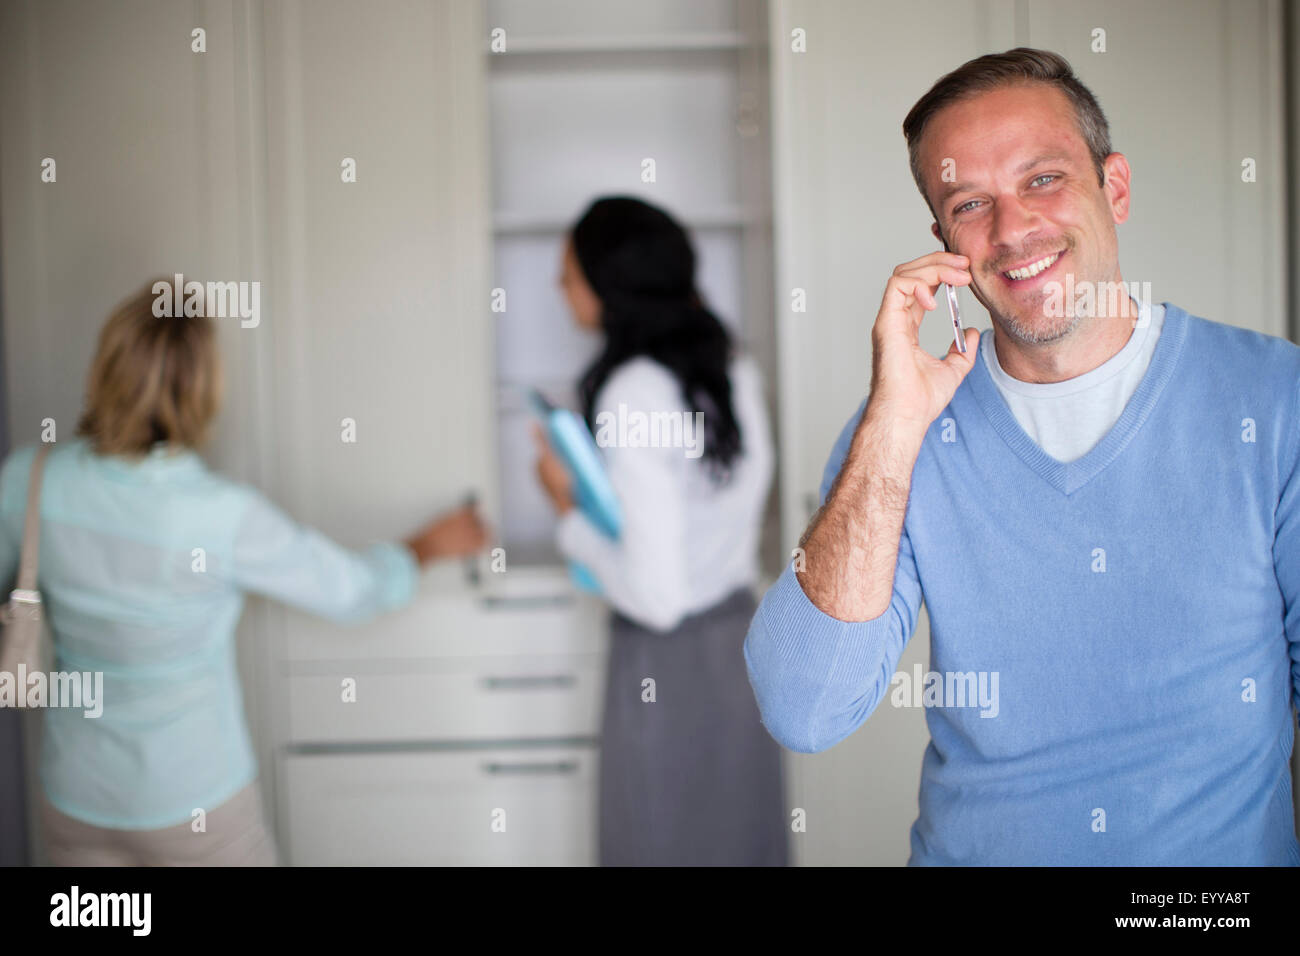 Man talking on cell phone in new home Stock Photo